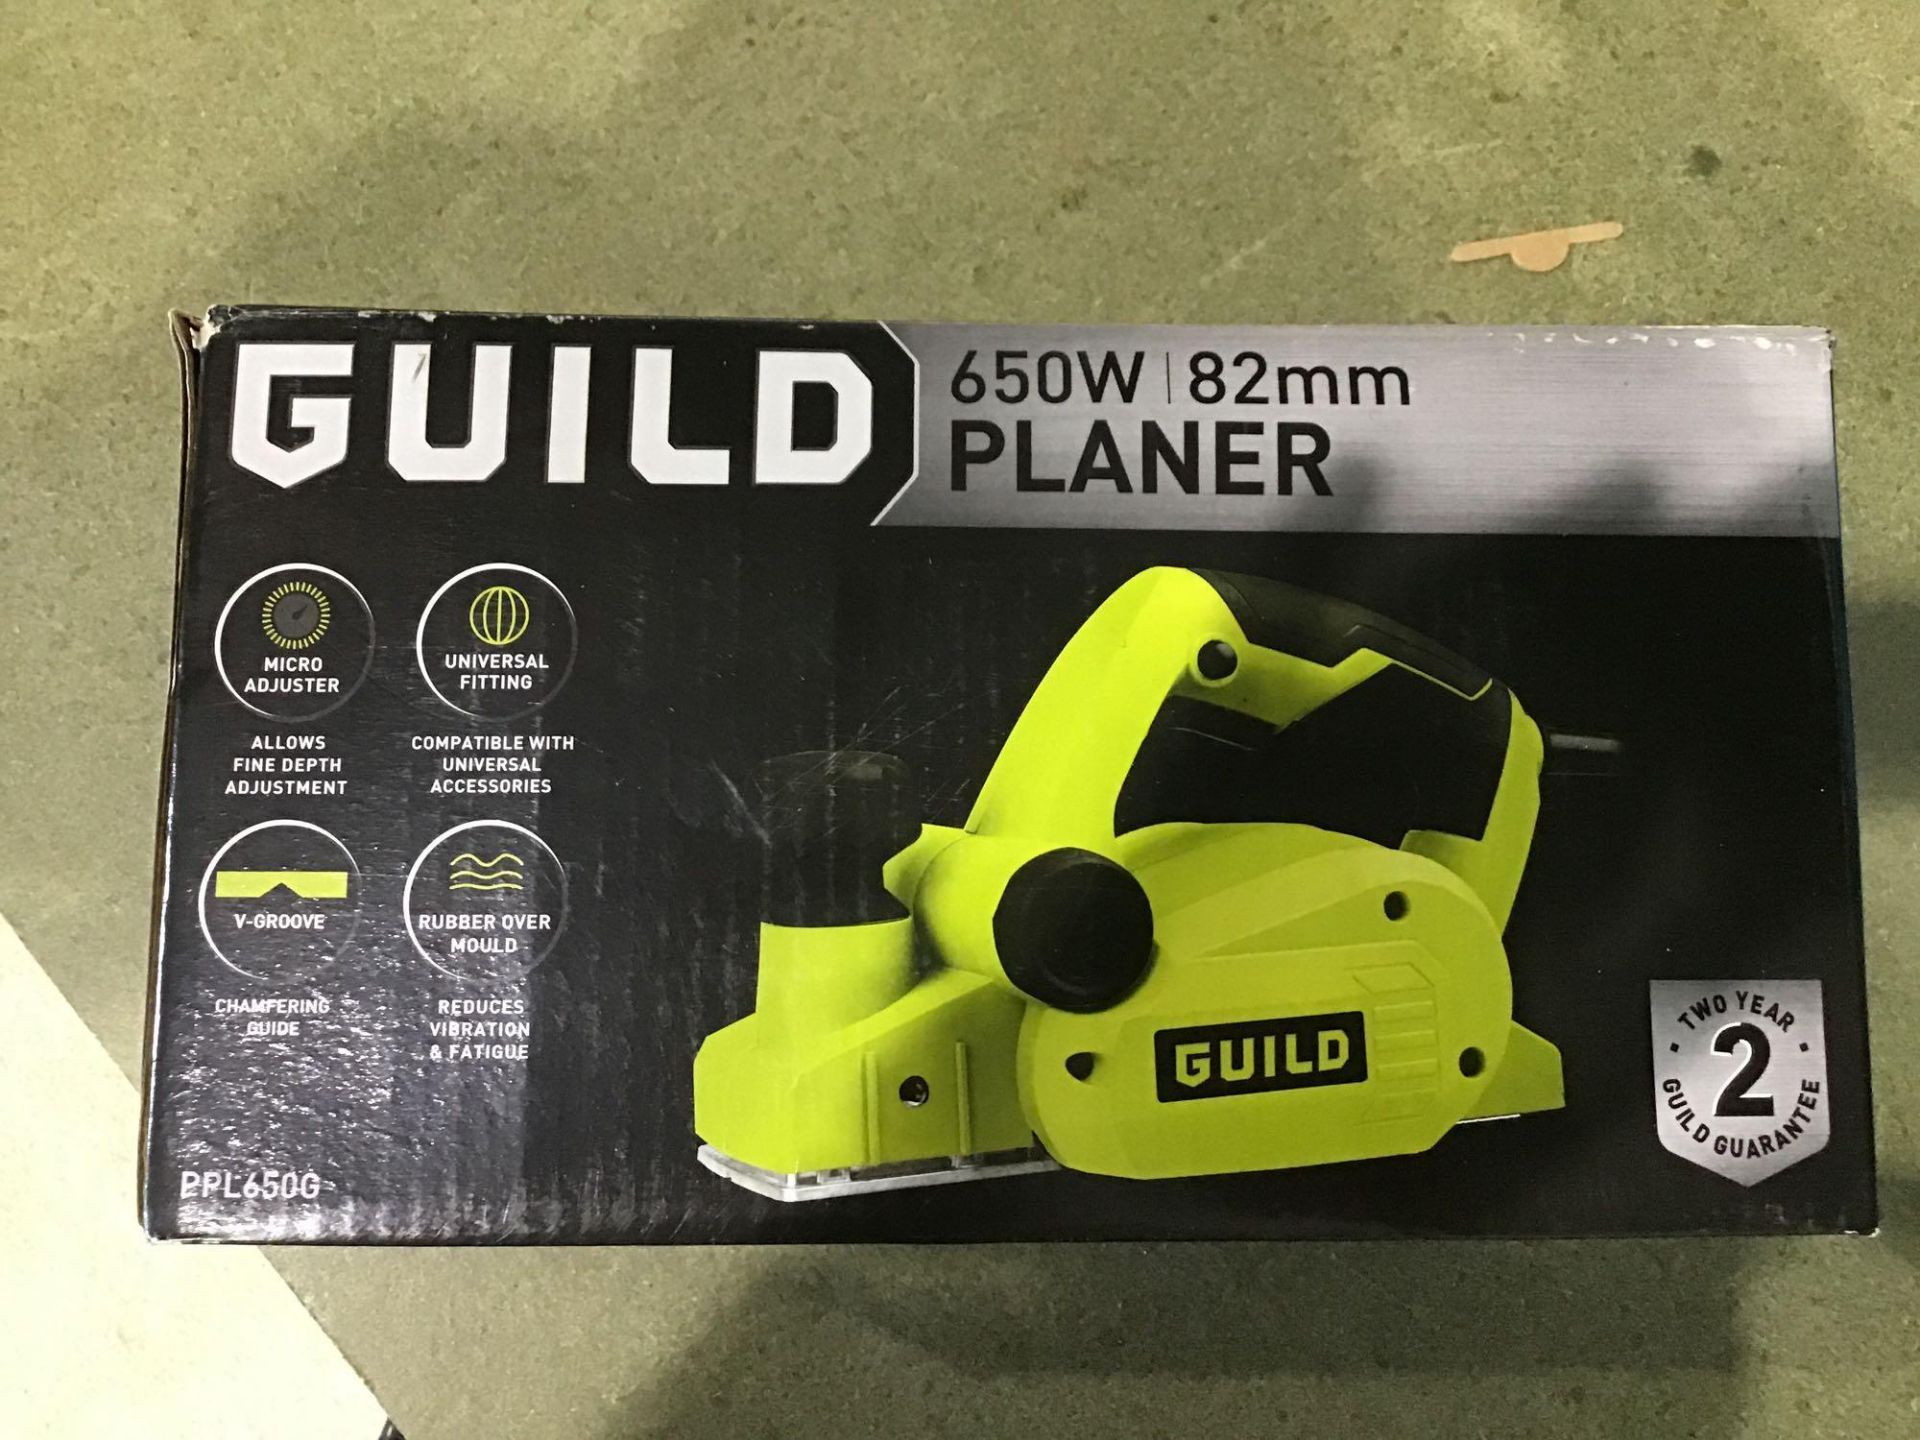 Guild Planer - 650W - £40.00 RRP - Image 2 of 4